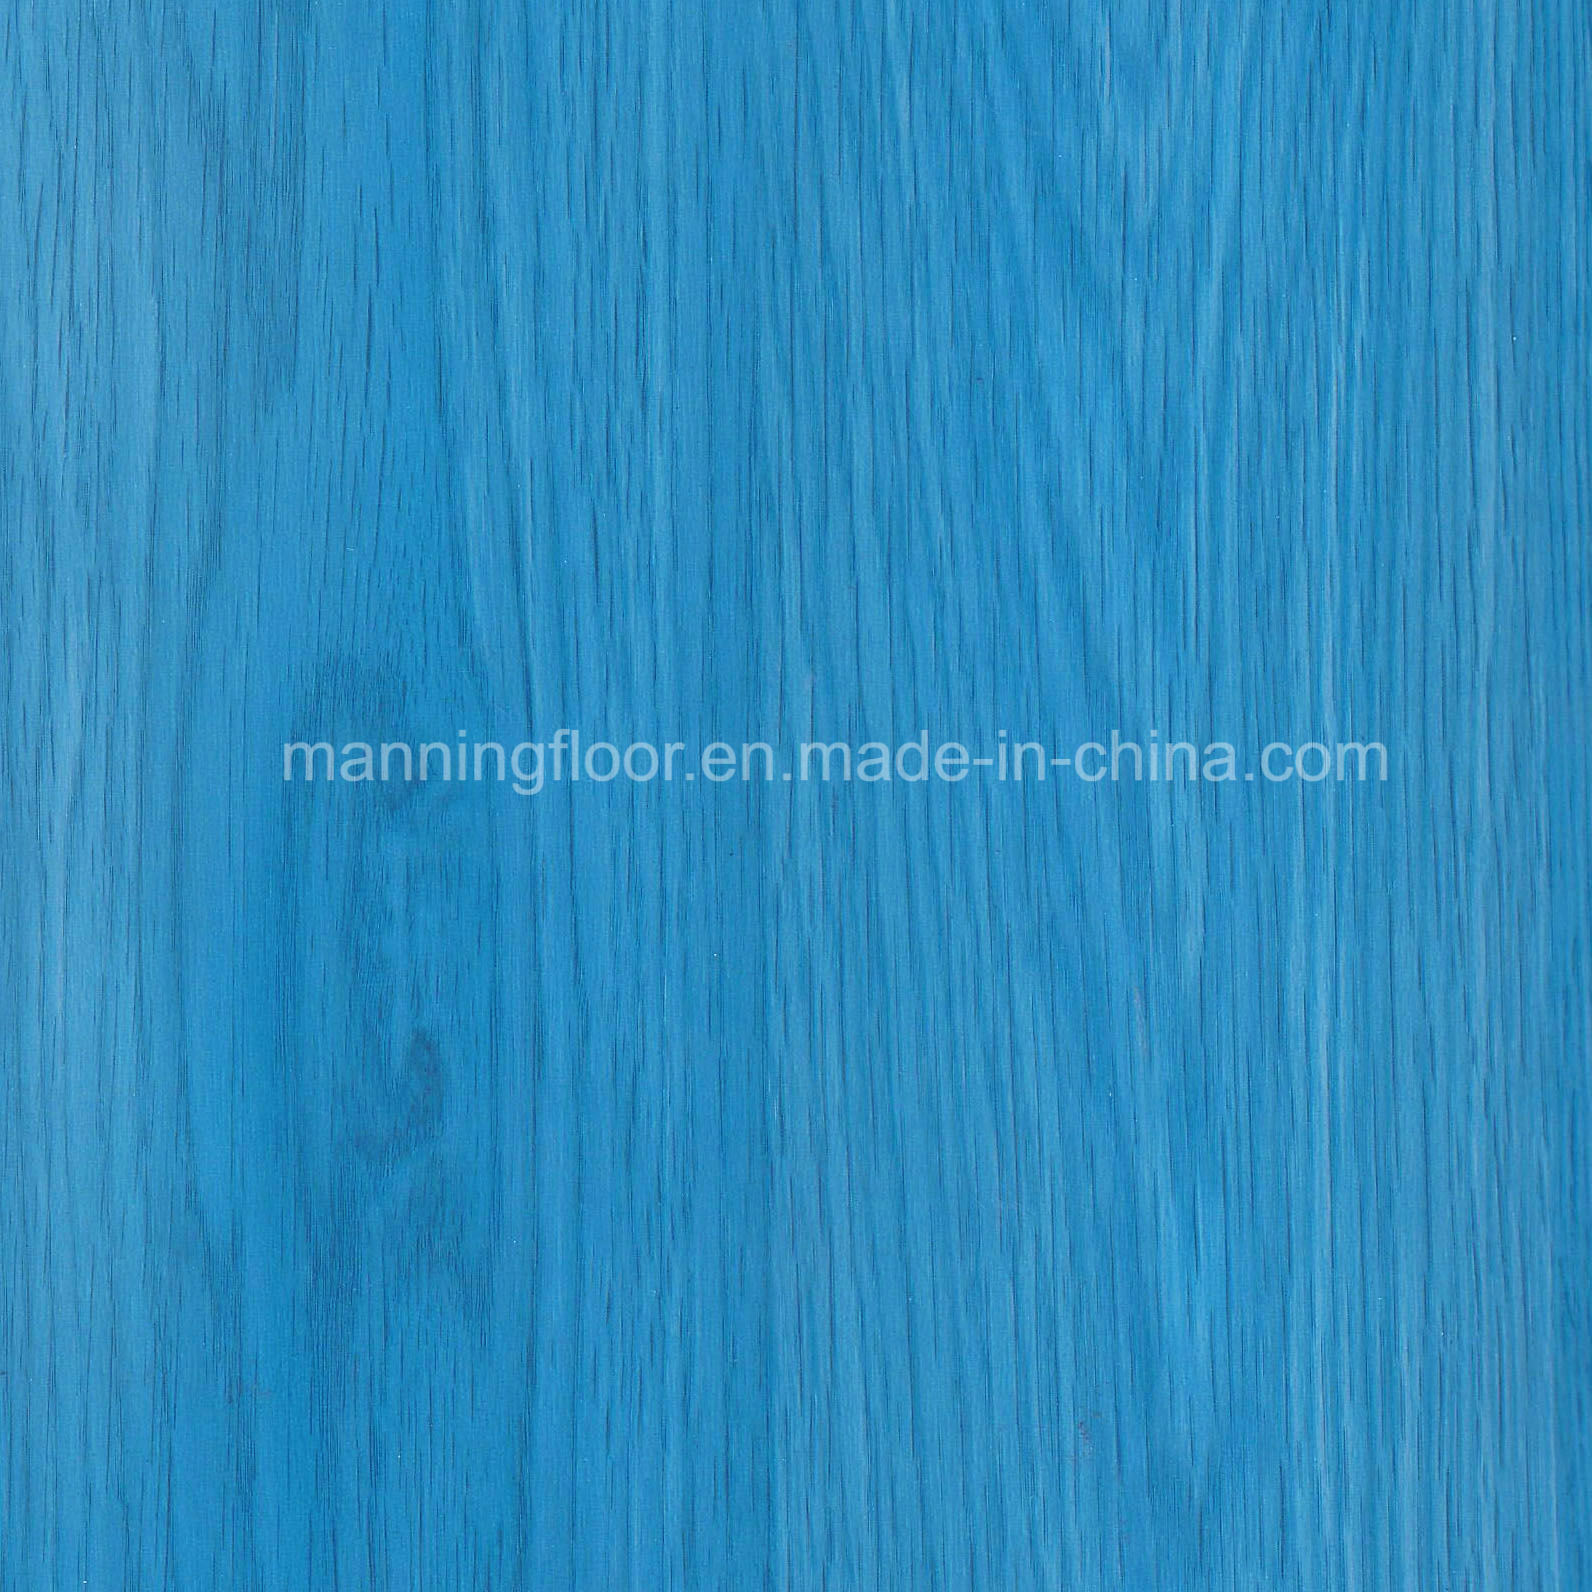 PVC Sports Flooring for Indoor Basketball Wood Pattern-8.0mm Thick Hj6813